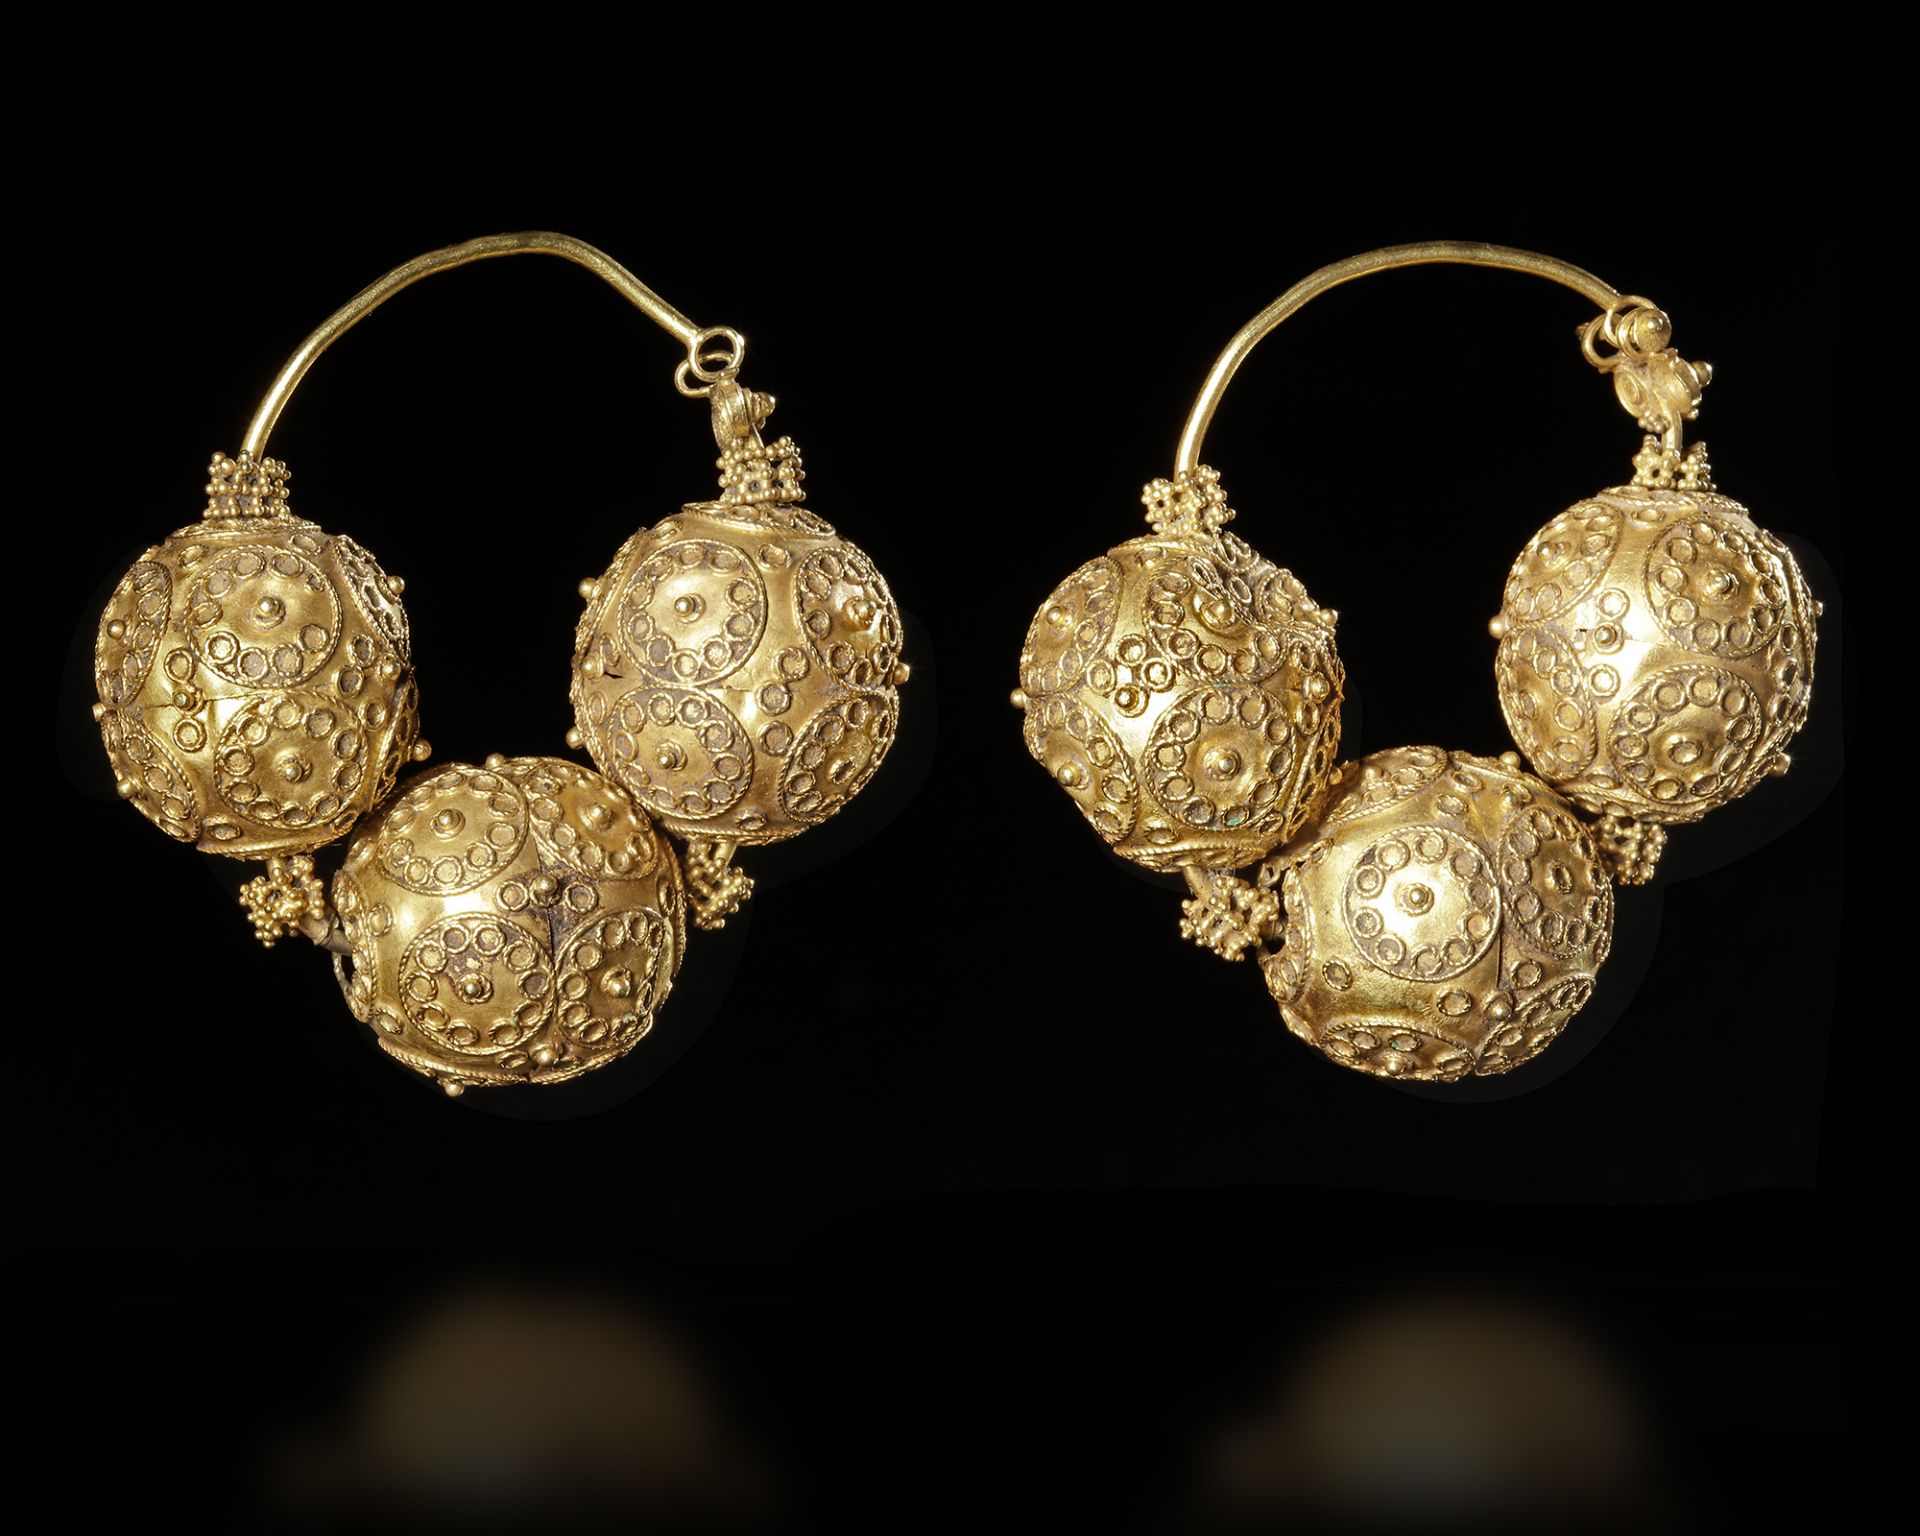 A PAIR OF EARLY ISLAMIC GOLD EARRINGS, 12TH CENTURY - Image 3 of 6